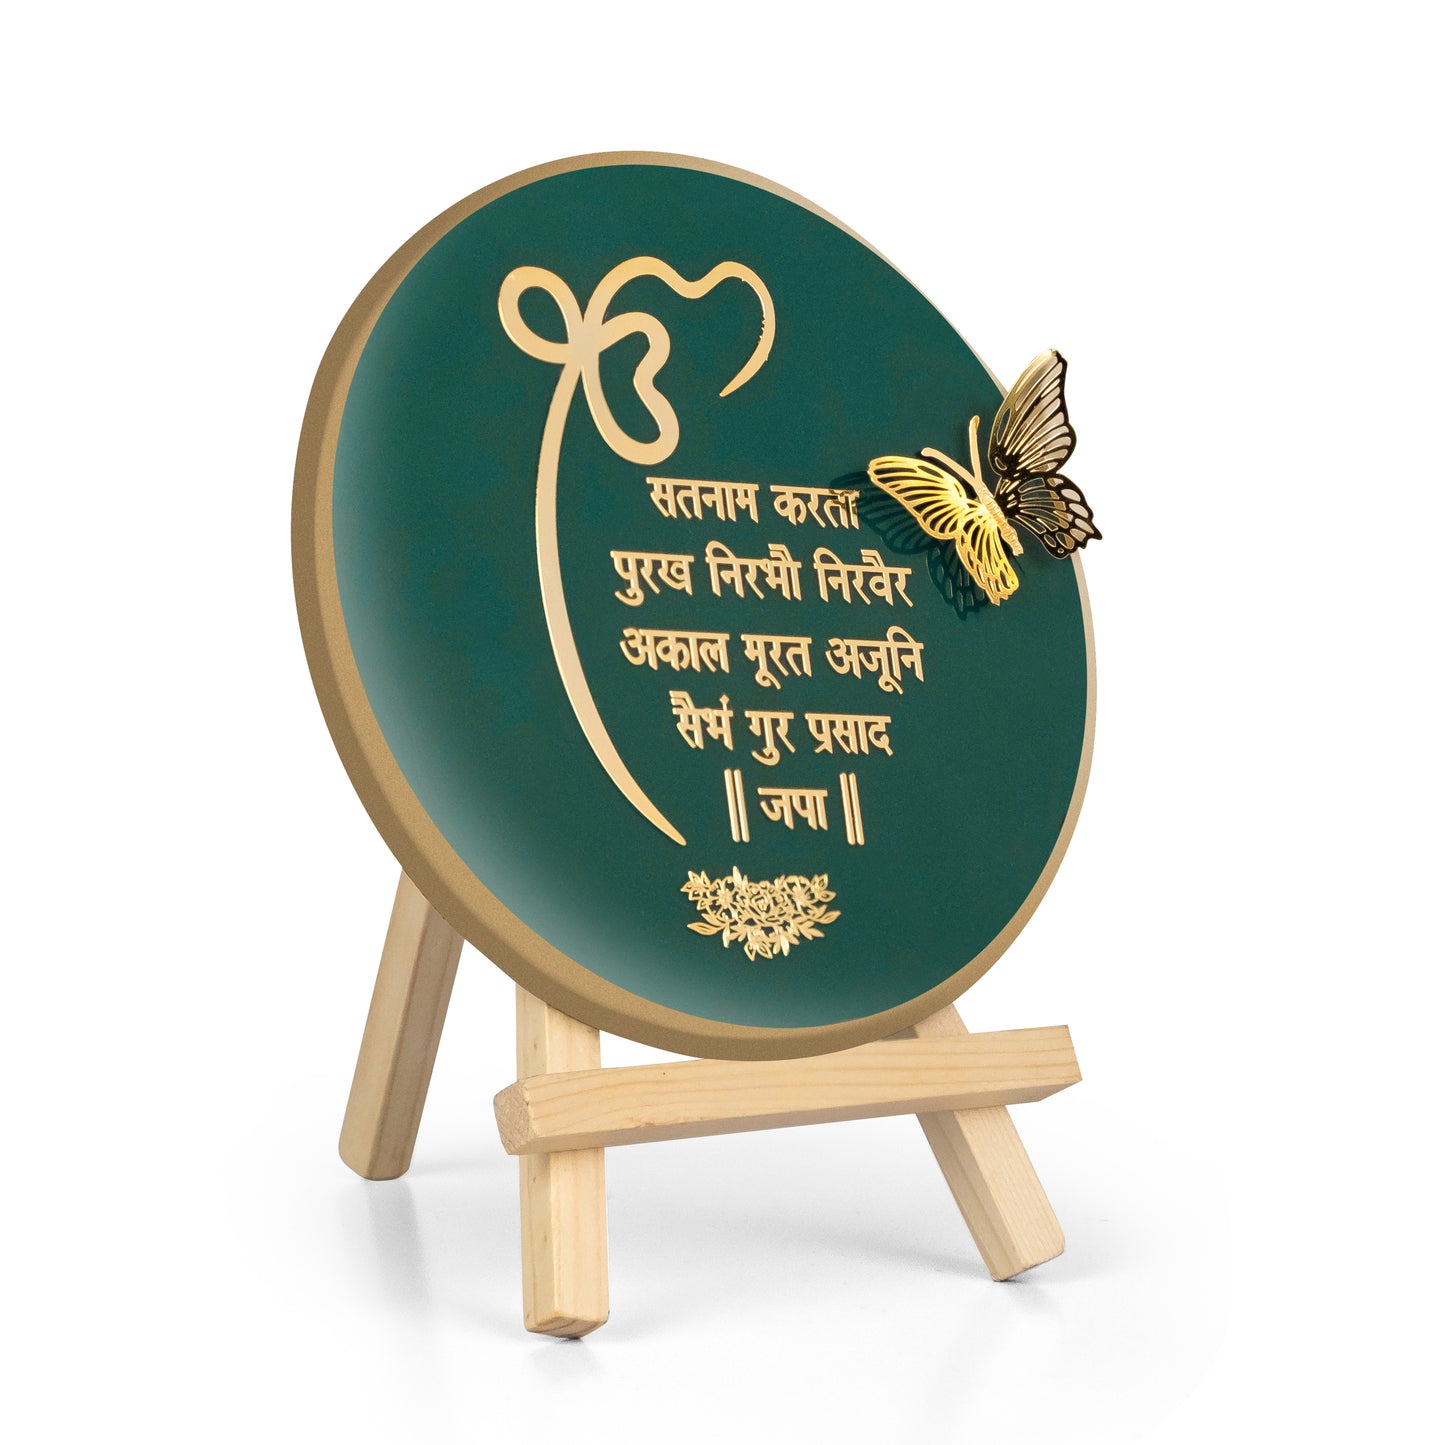 Onkar Mantra Resin Art Gold Cutwork with A Type Pine Wood Easel Stand